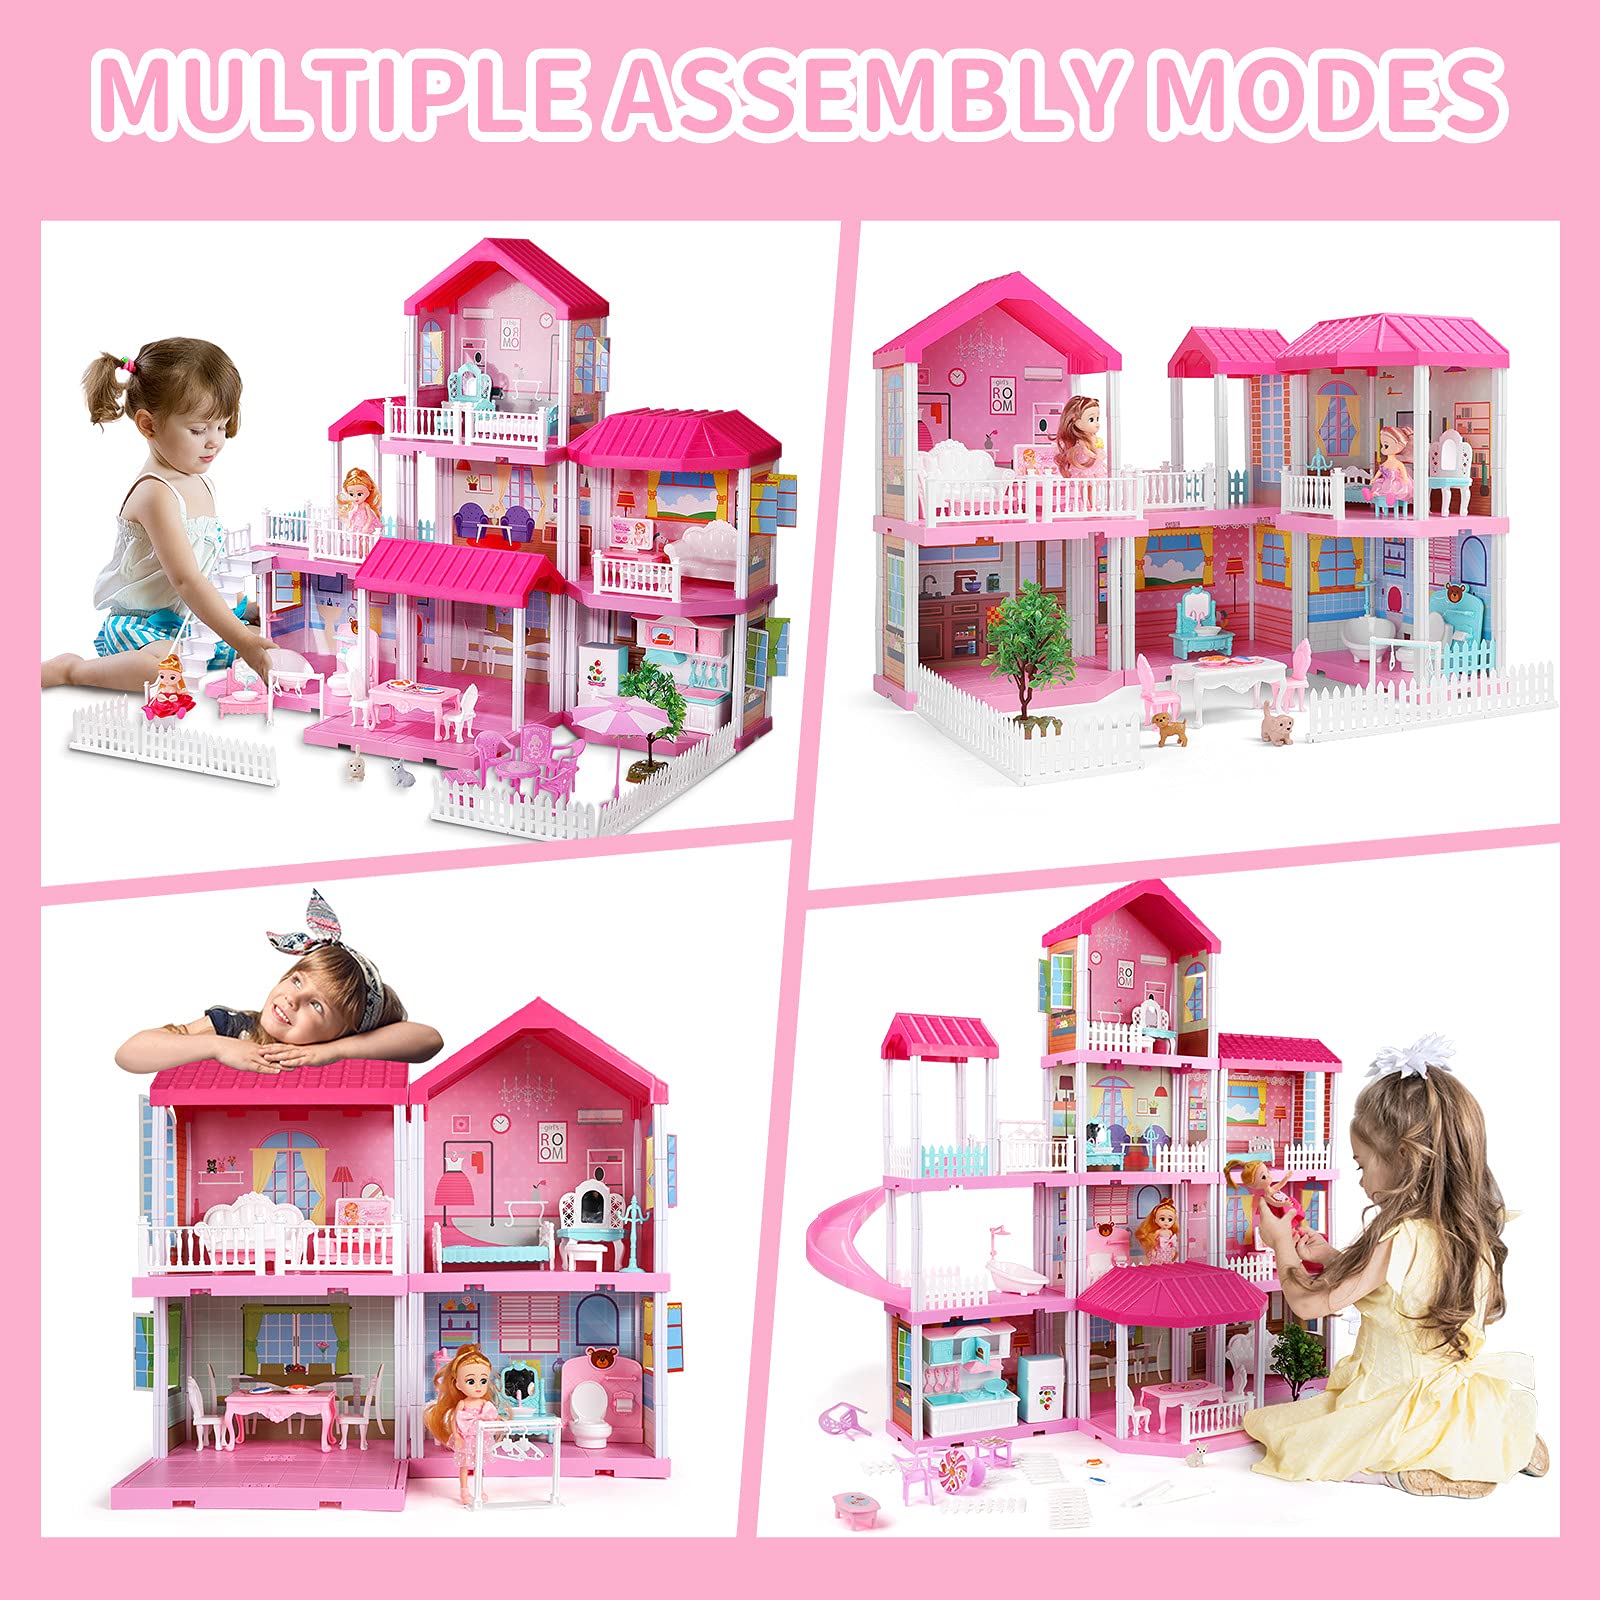 Doll House Play House with Doll Toy Figures, Furniture and Accessories, 4-Story 10 Rooms Toddler Dollhouse Gift for Kids Ages 3+, Playhouse Toys for 3 4 5 6 7 Year Old Girls